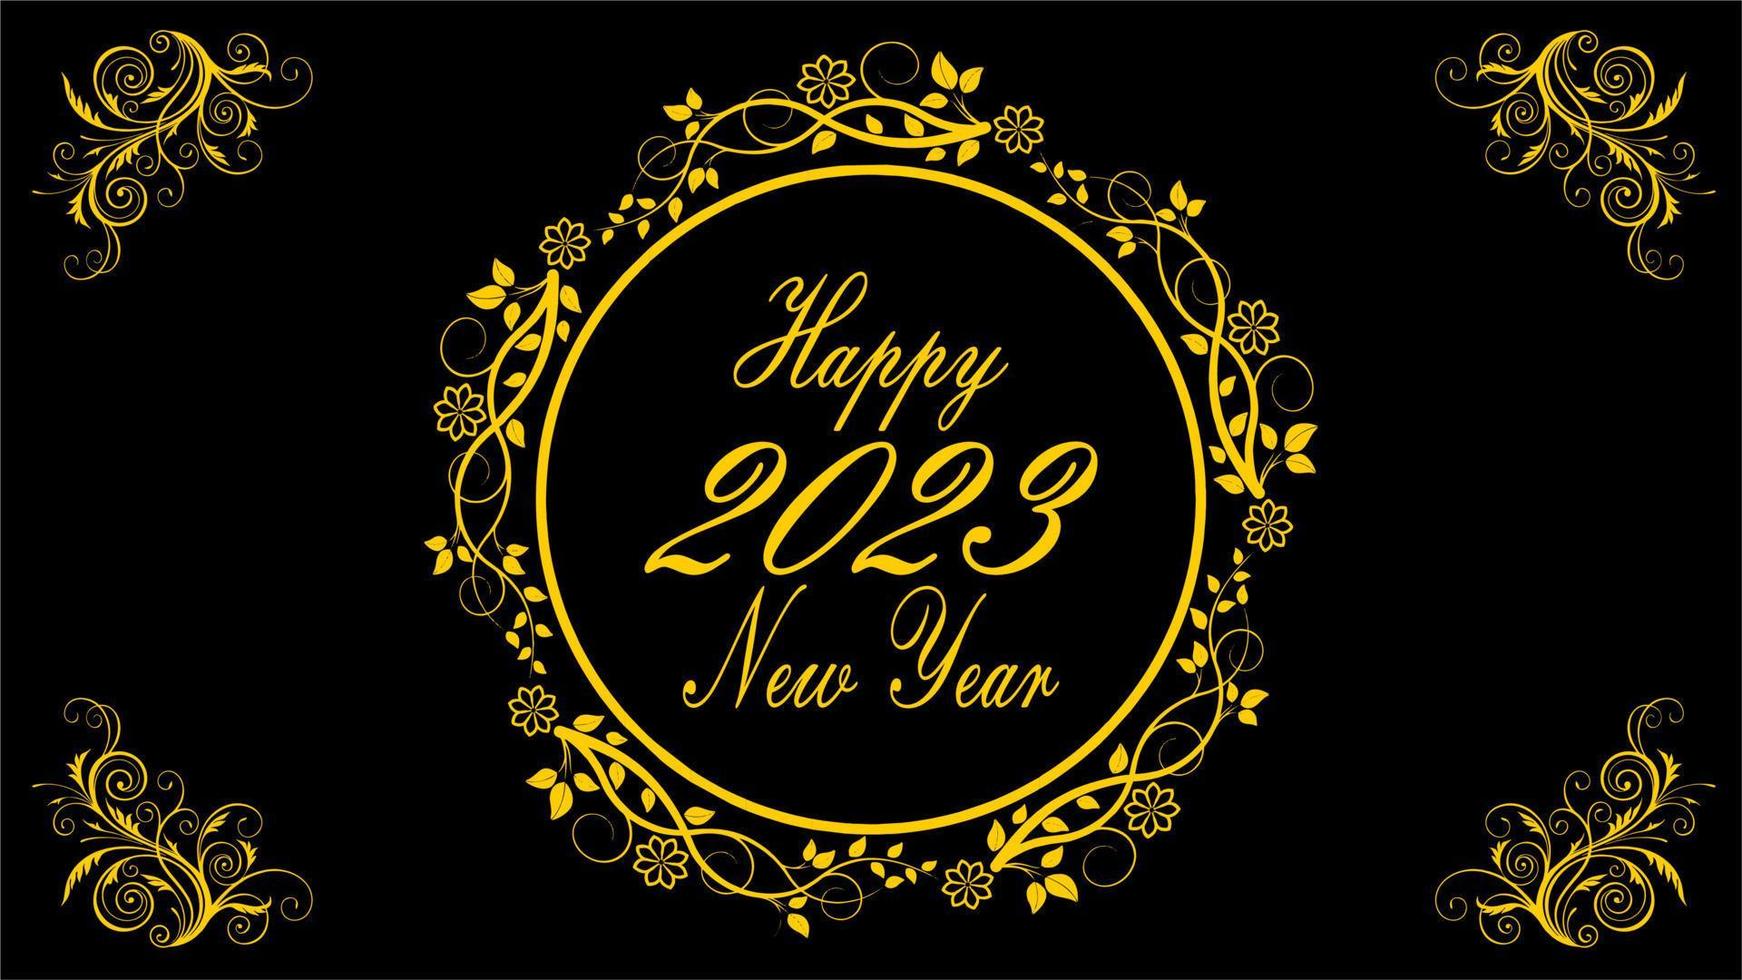 Happy New Year 2023. Beautiful gold text floral ornament isolated on black background. Suitable for greeting card, banner, poster, logo, business vector